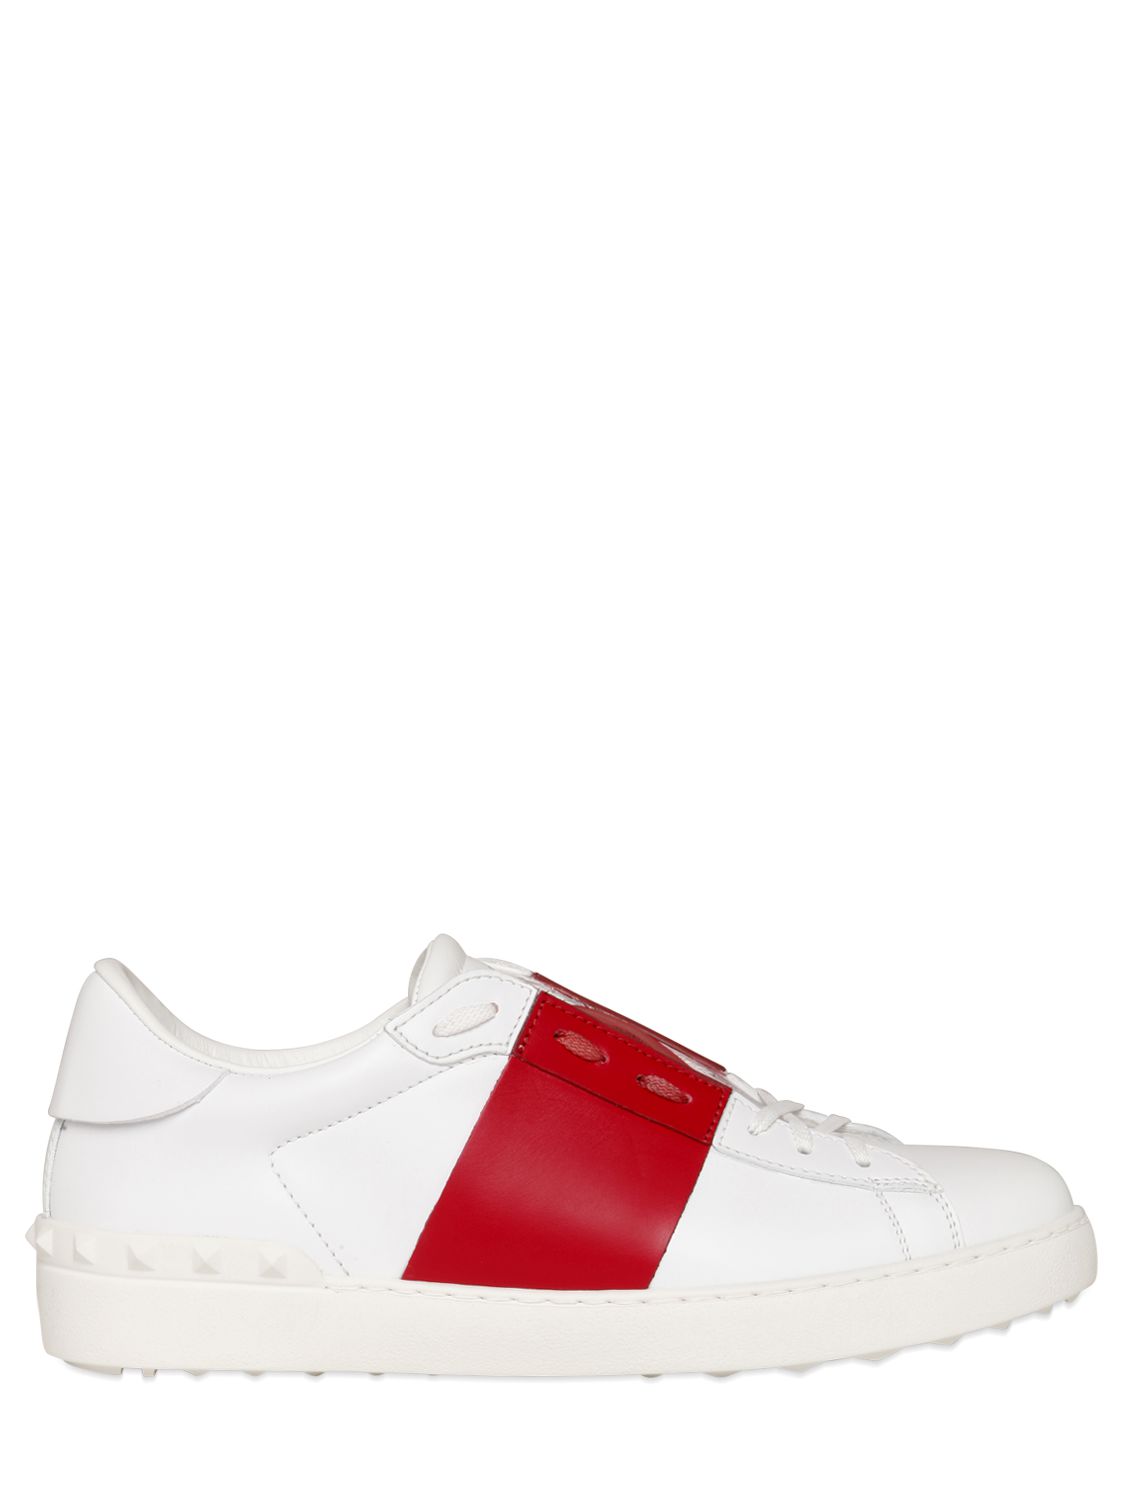 Valentino sneakers "open" in pelle bianco/rosso uomo scarpe,valentino scarpe bitonto,tubino valentino red,Comprare